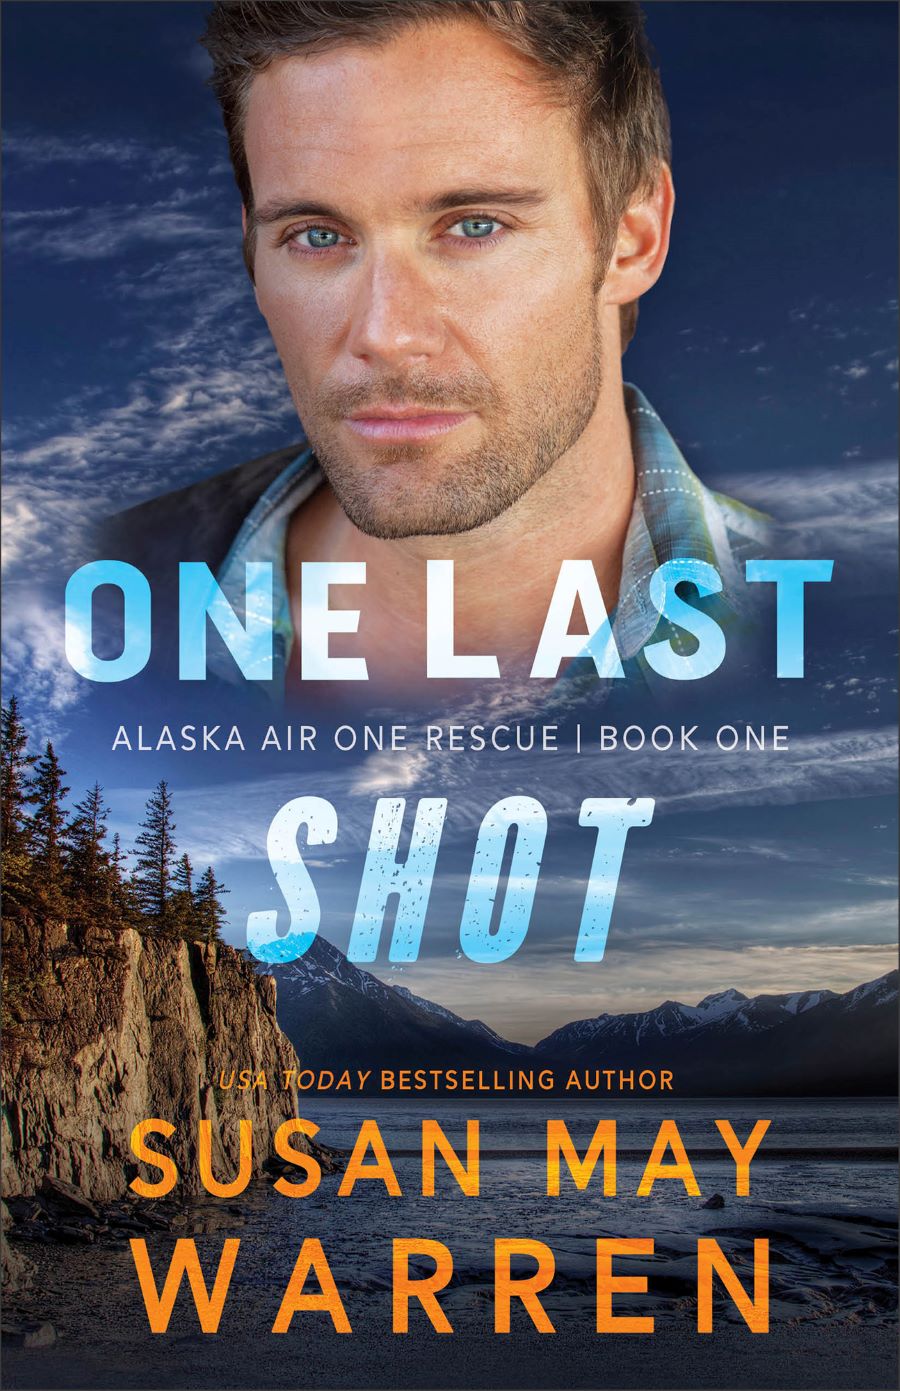 Front cover of One Last Shot by Susan May Warren.